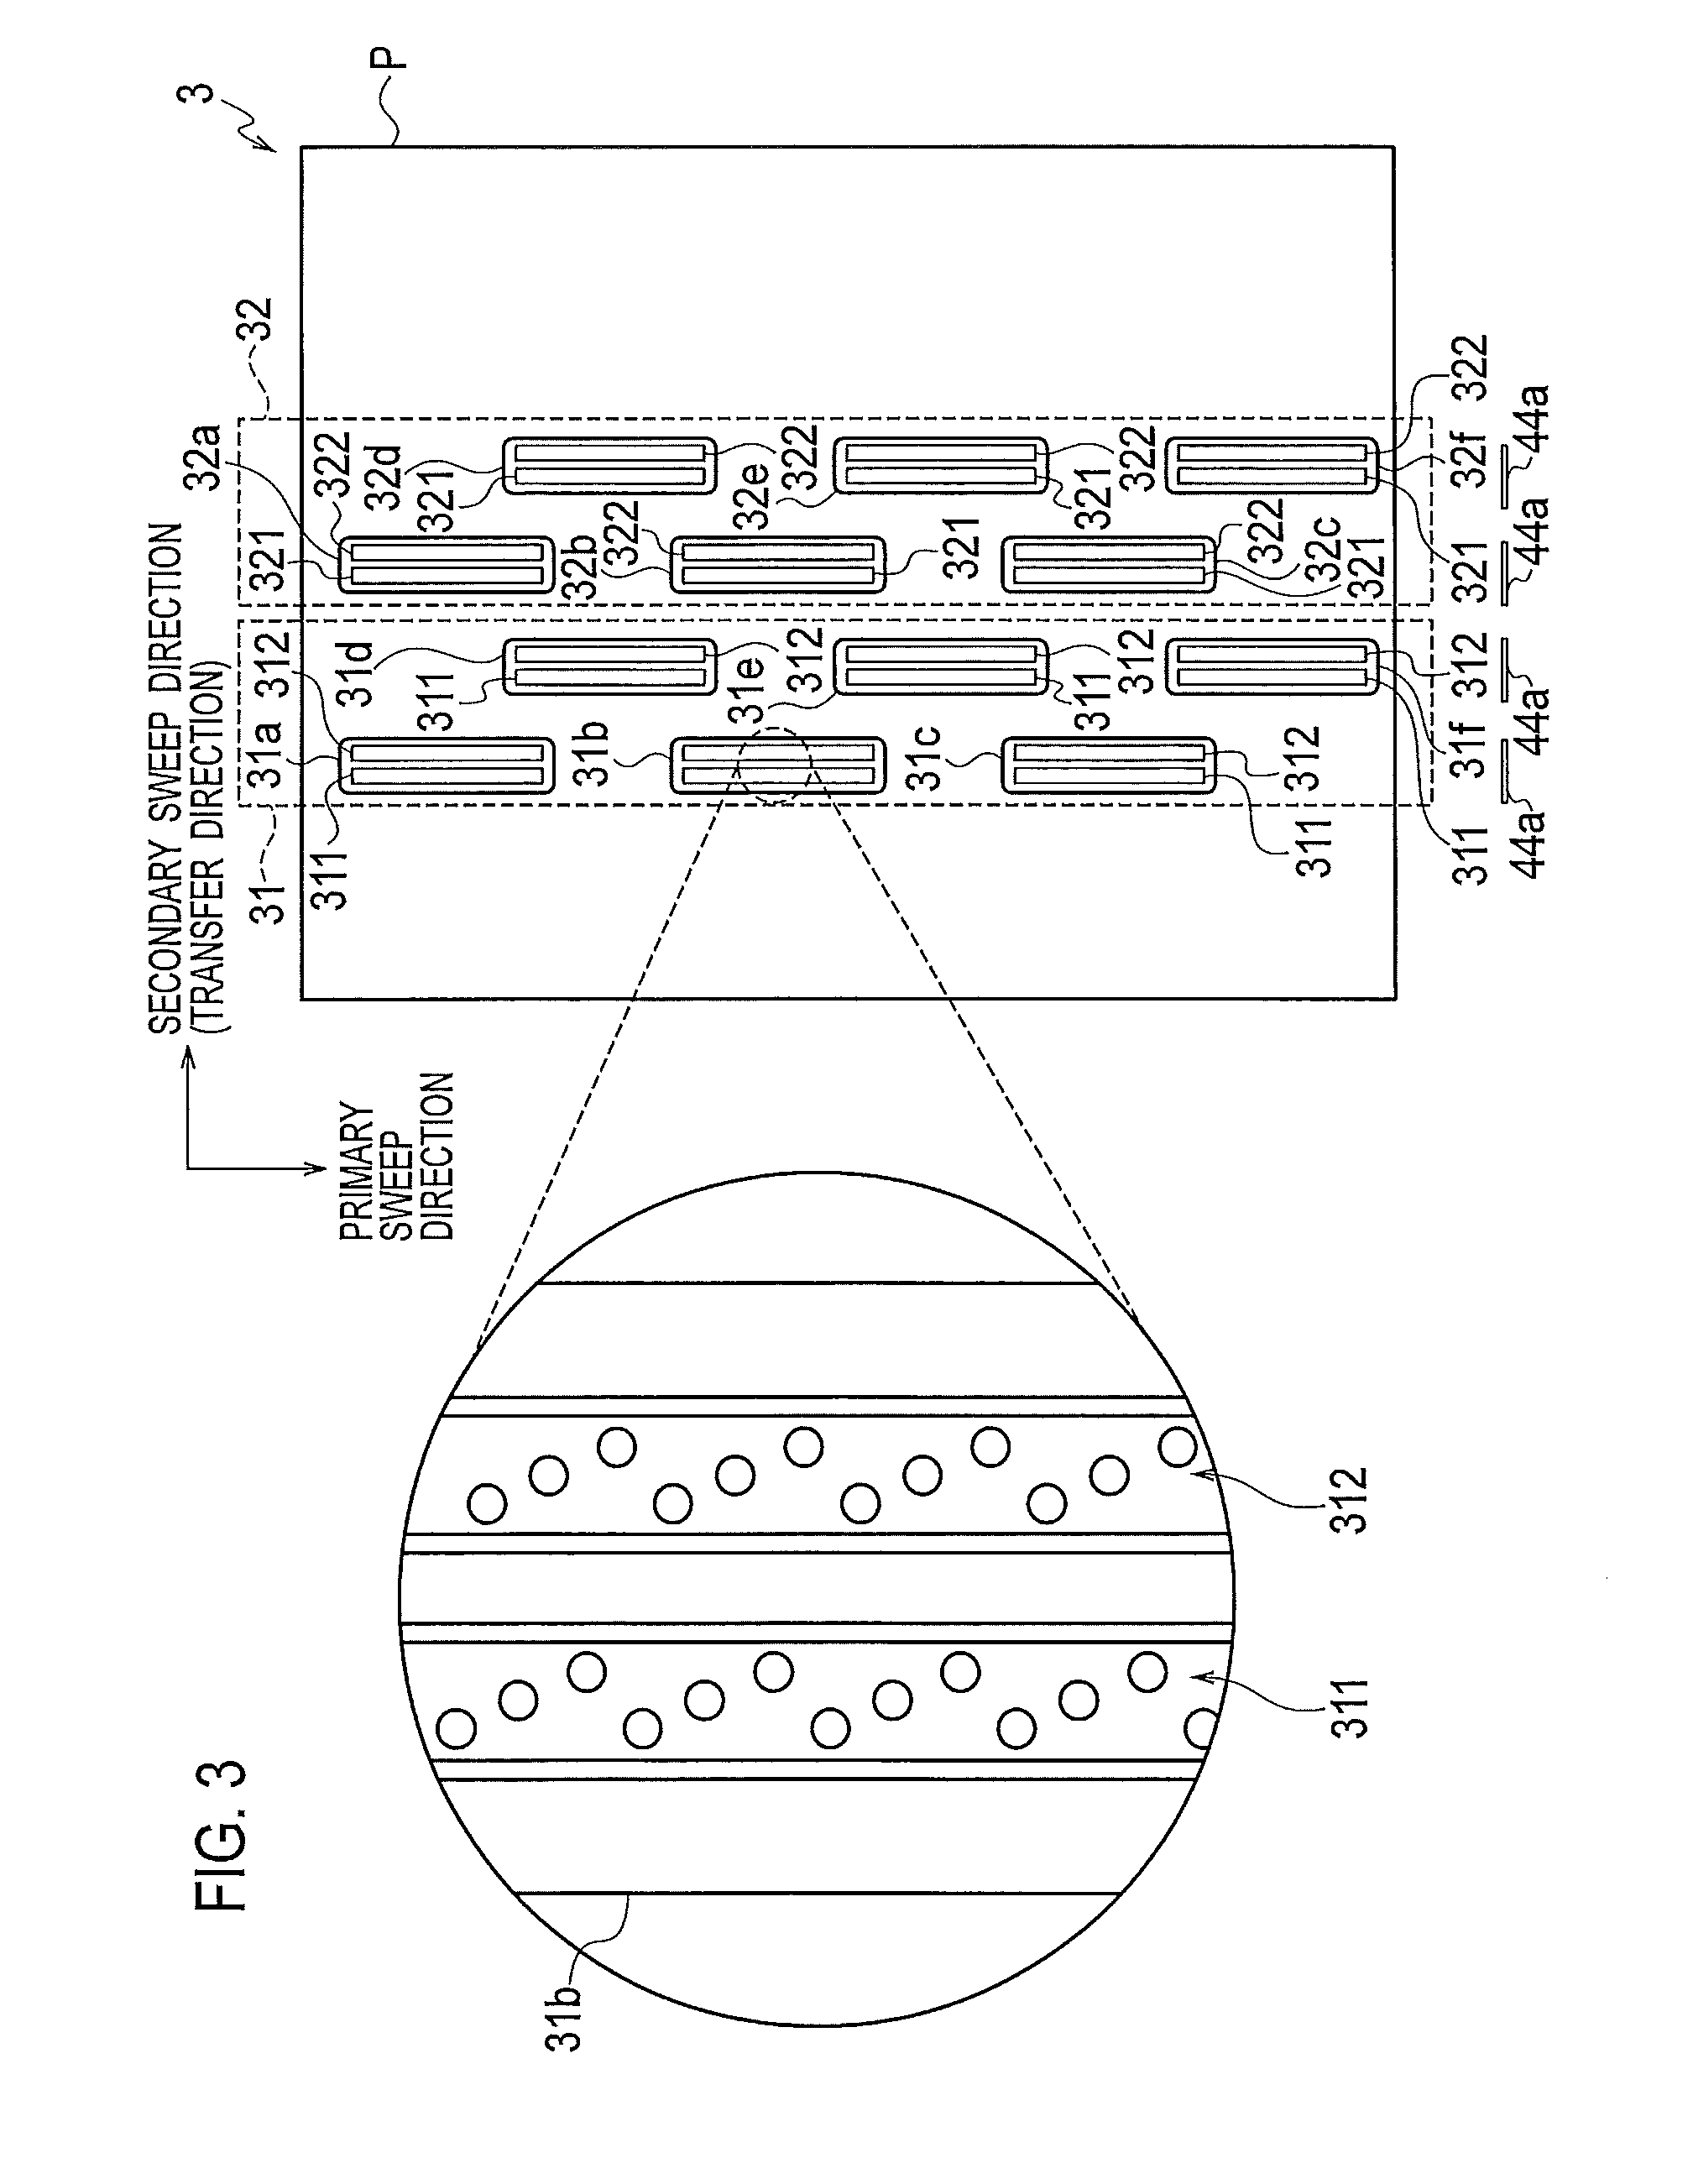 Inkjet image forming apparatus and cleaning method for inkjet image forming apparatus